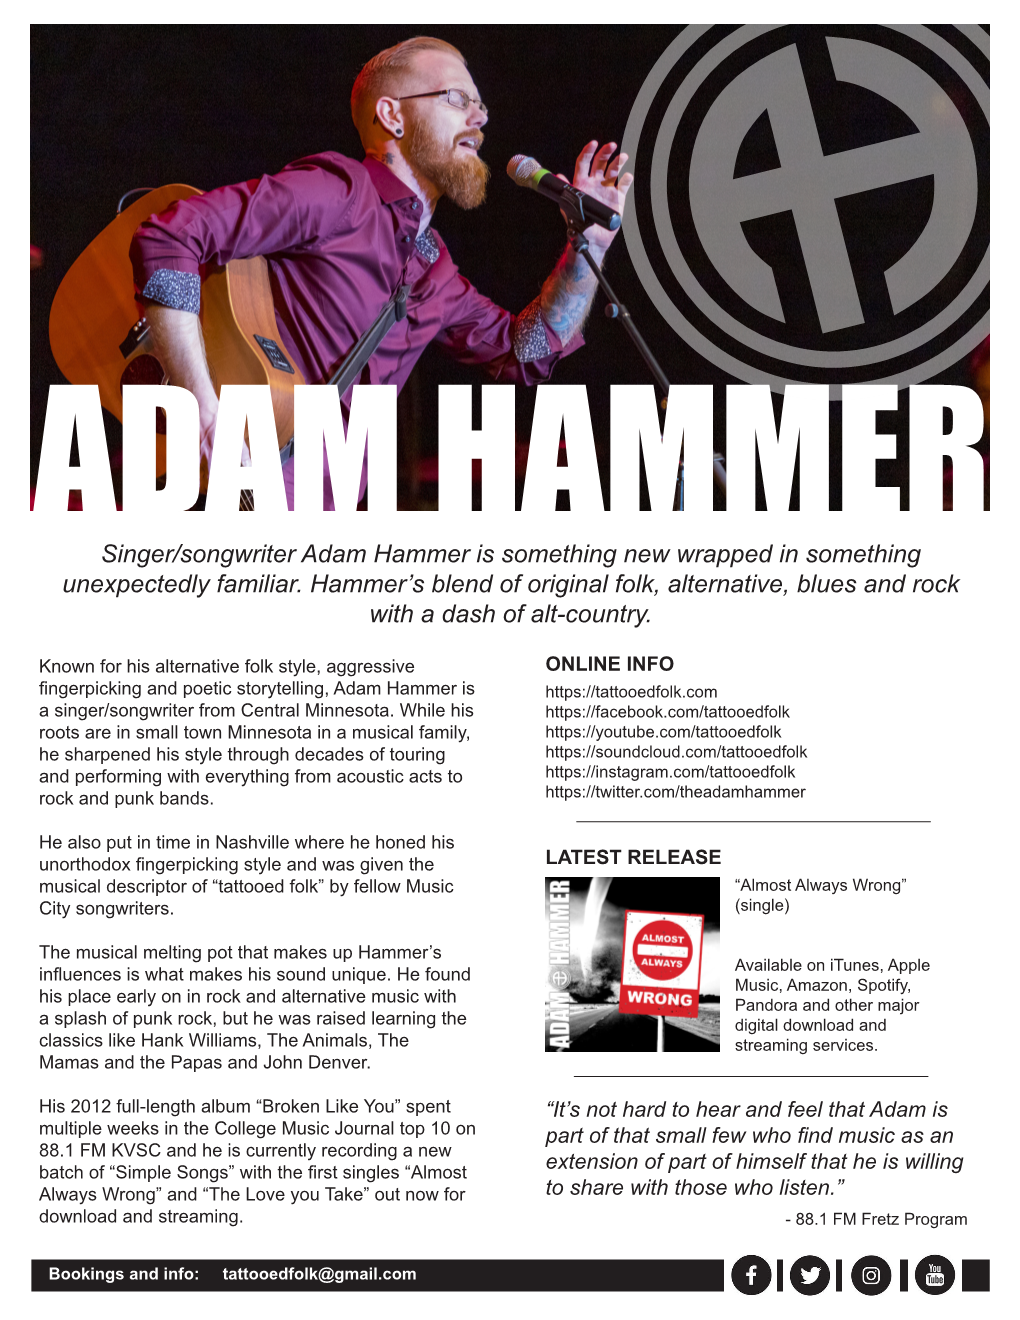 Singer/Songwriter Adam Hammer Is Something New Wrapped in Something Unexpectedly Familiar